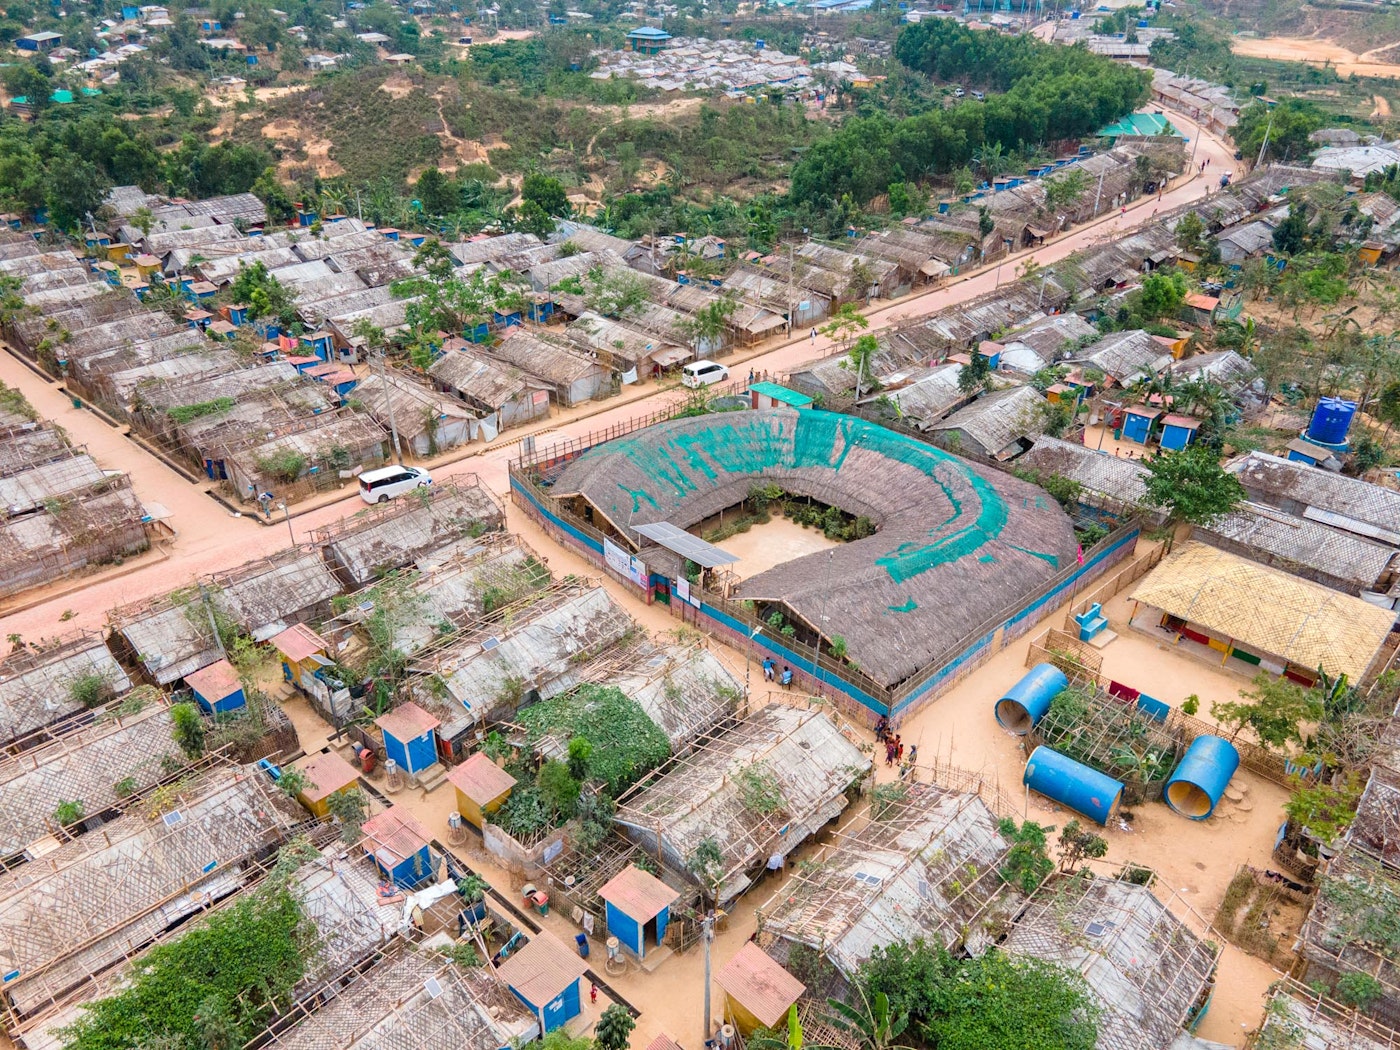 Aerial view of the Shantikhana Women Friendly Space in Camp 4ext. The construction started before the design was finalised, allowing the local Rohingya workers to express their artisanal skills and artistic freedom